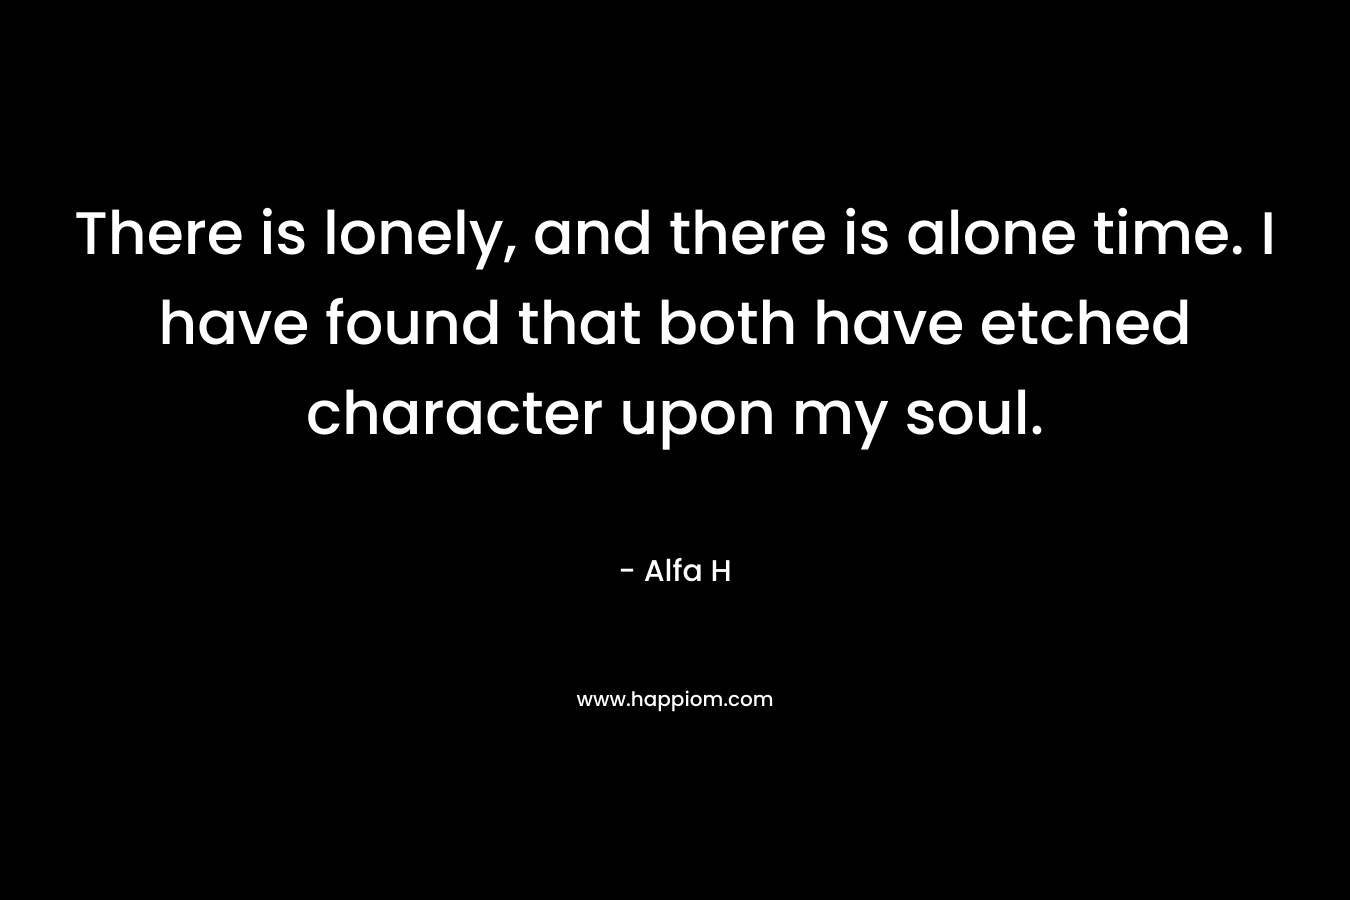 There is lonely, and there is alone time. I have found that both have etched character upon my soul.